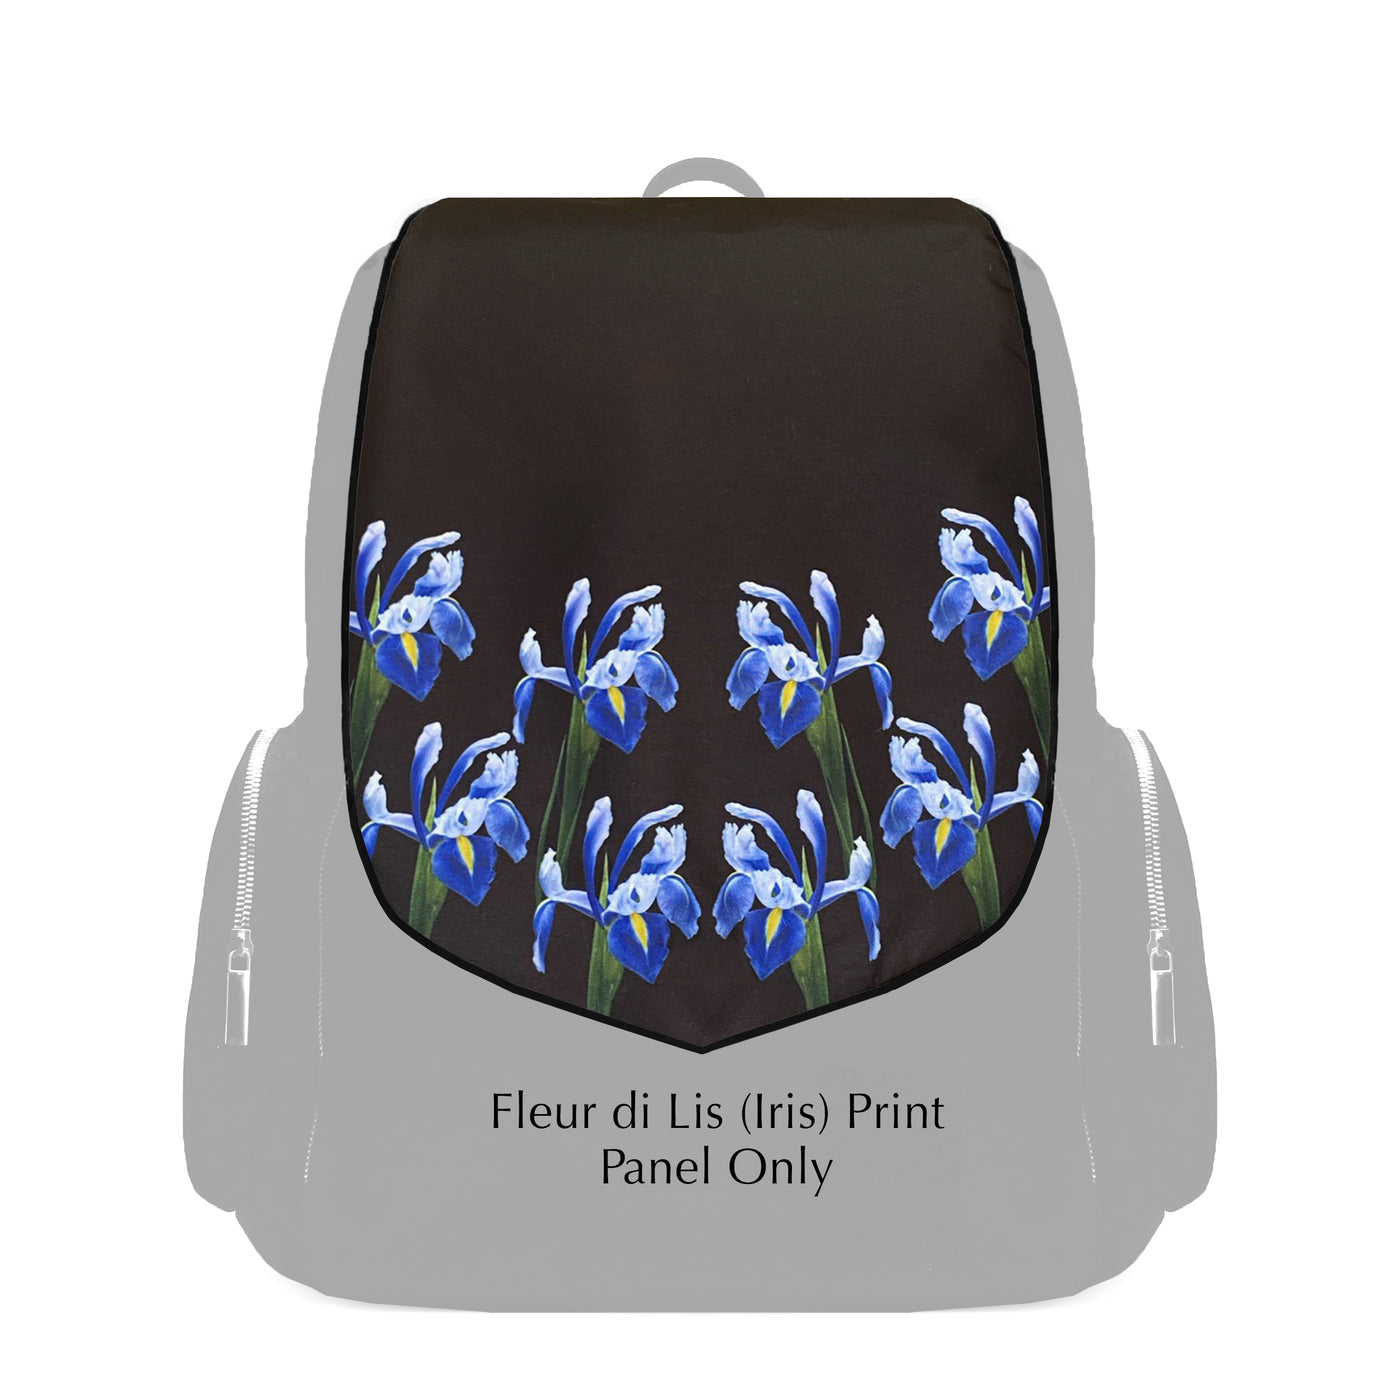 Panel Only in Blue Iris Print